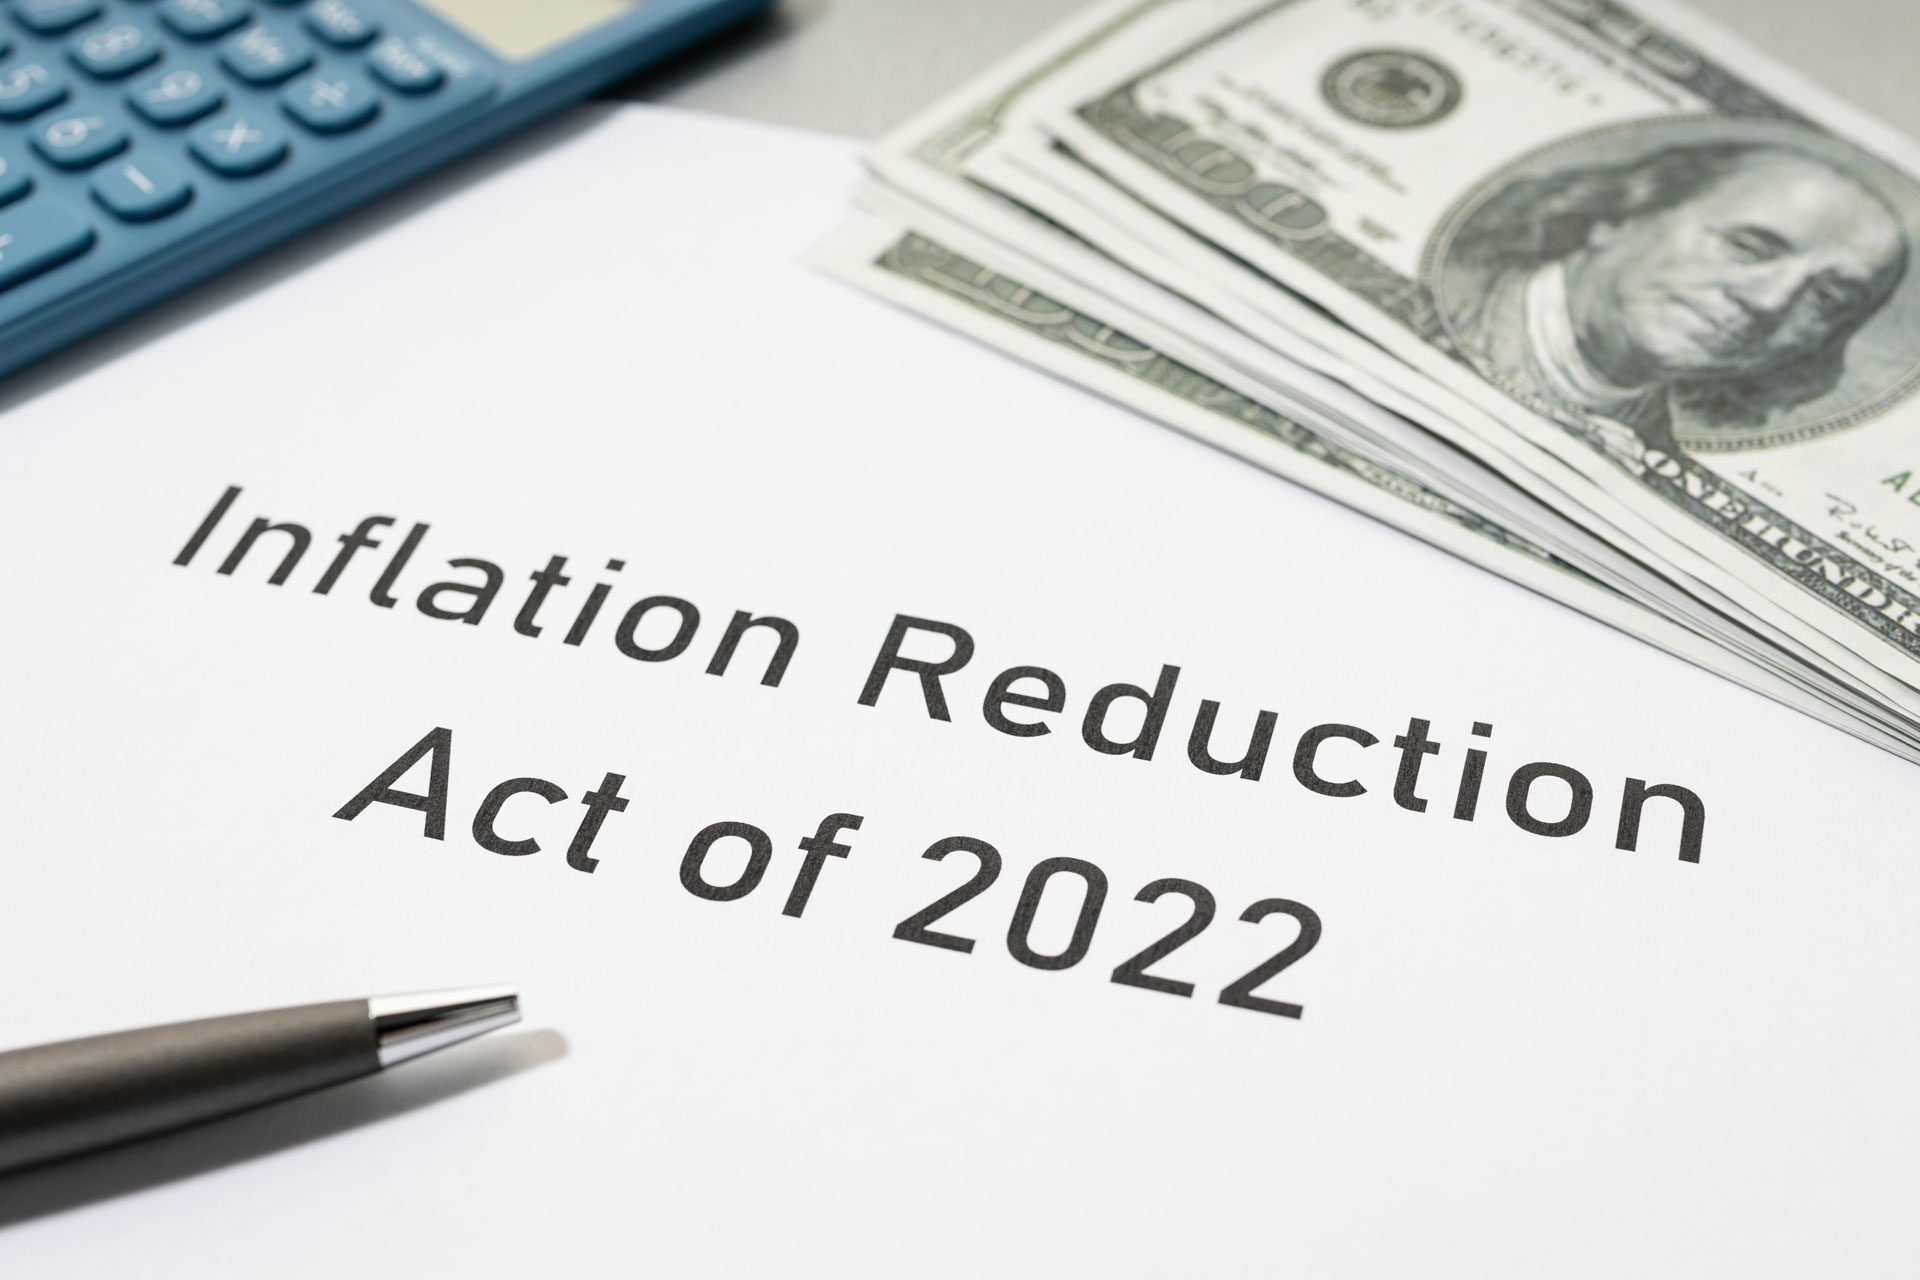 inflation-reduction-act-of-2022-the-hollander-group